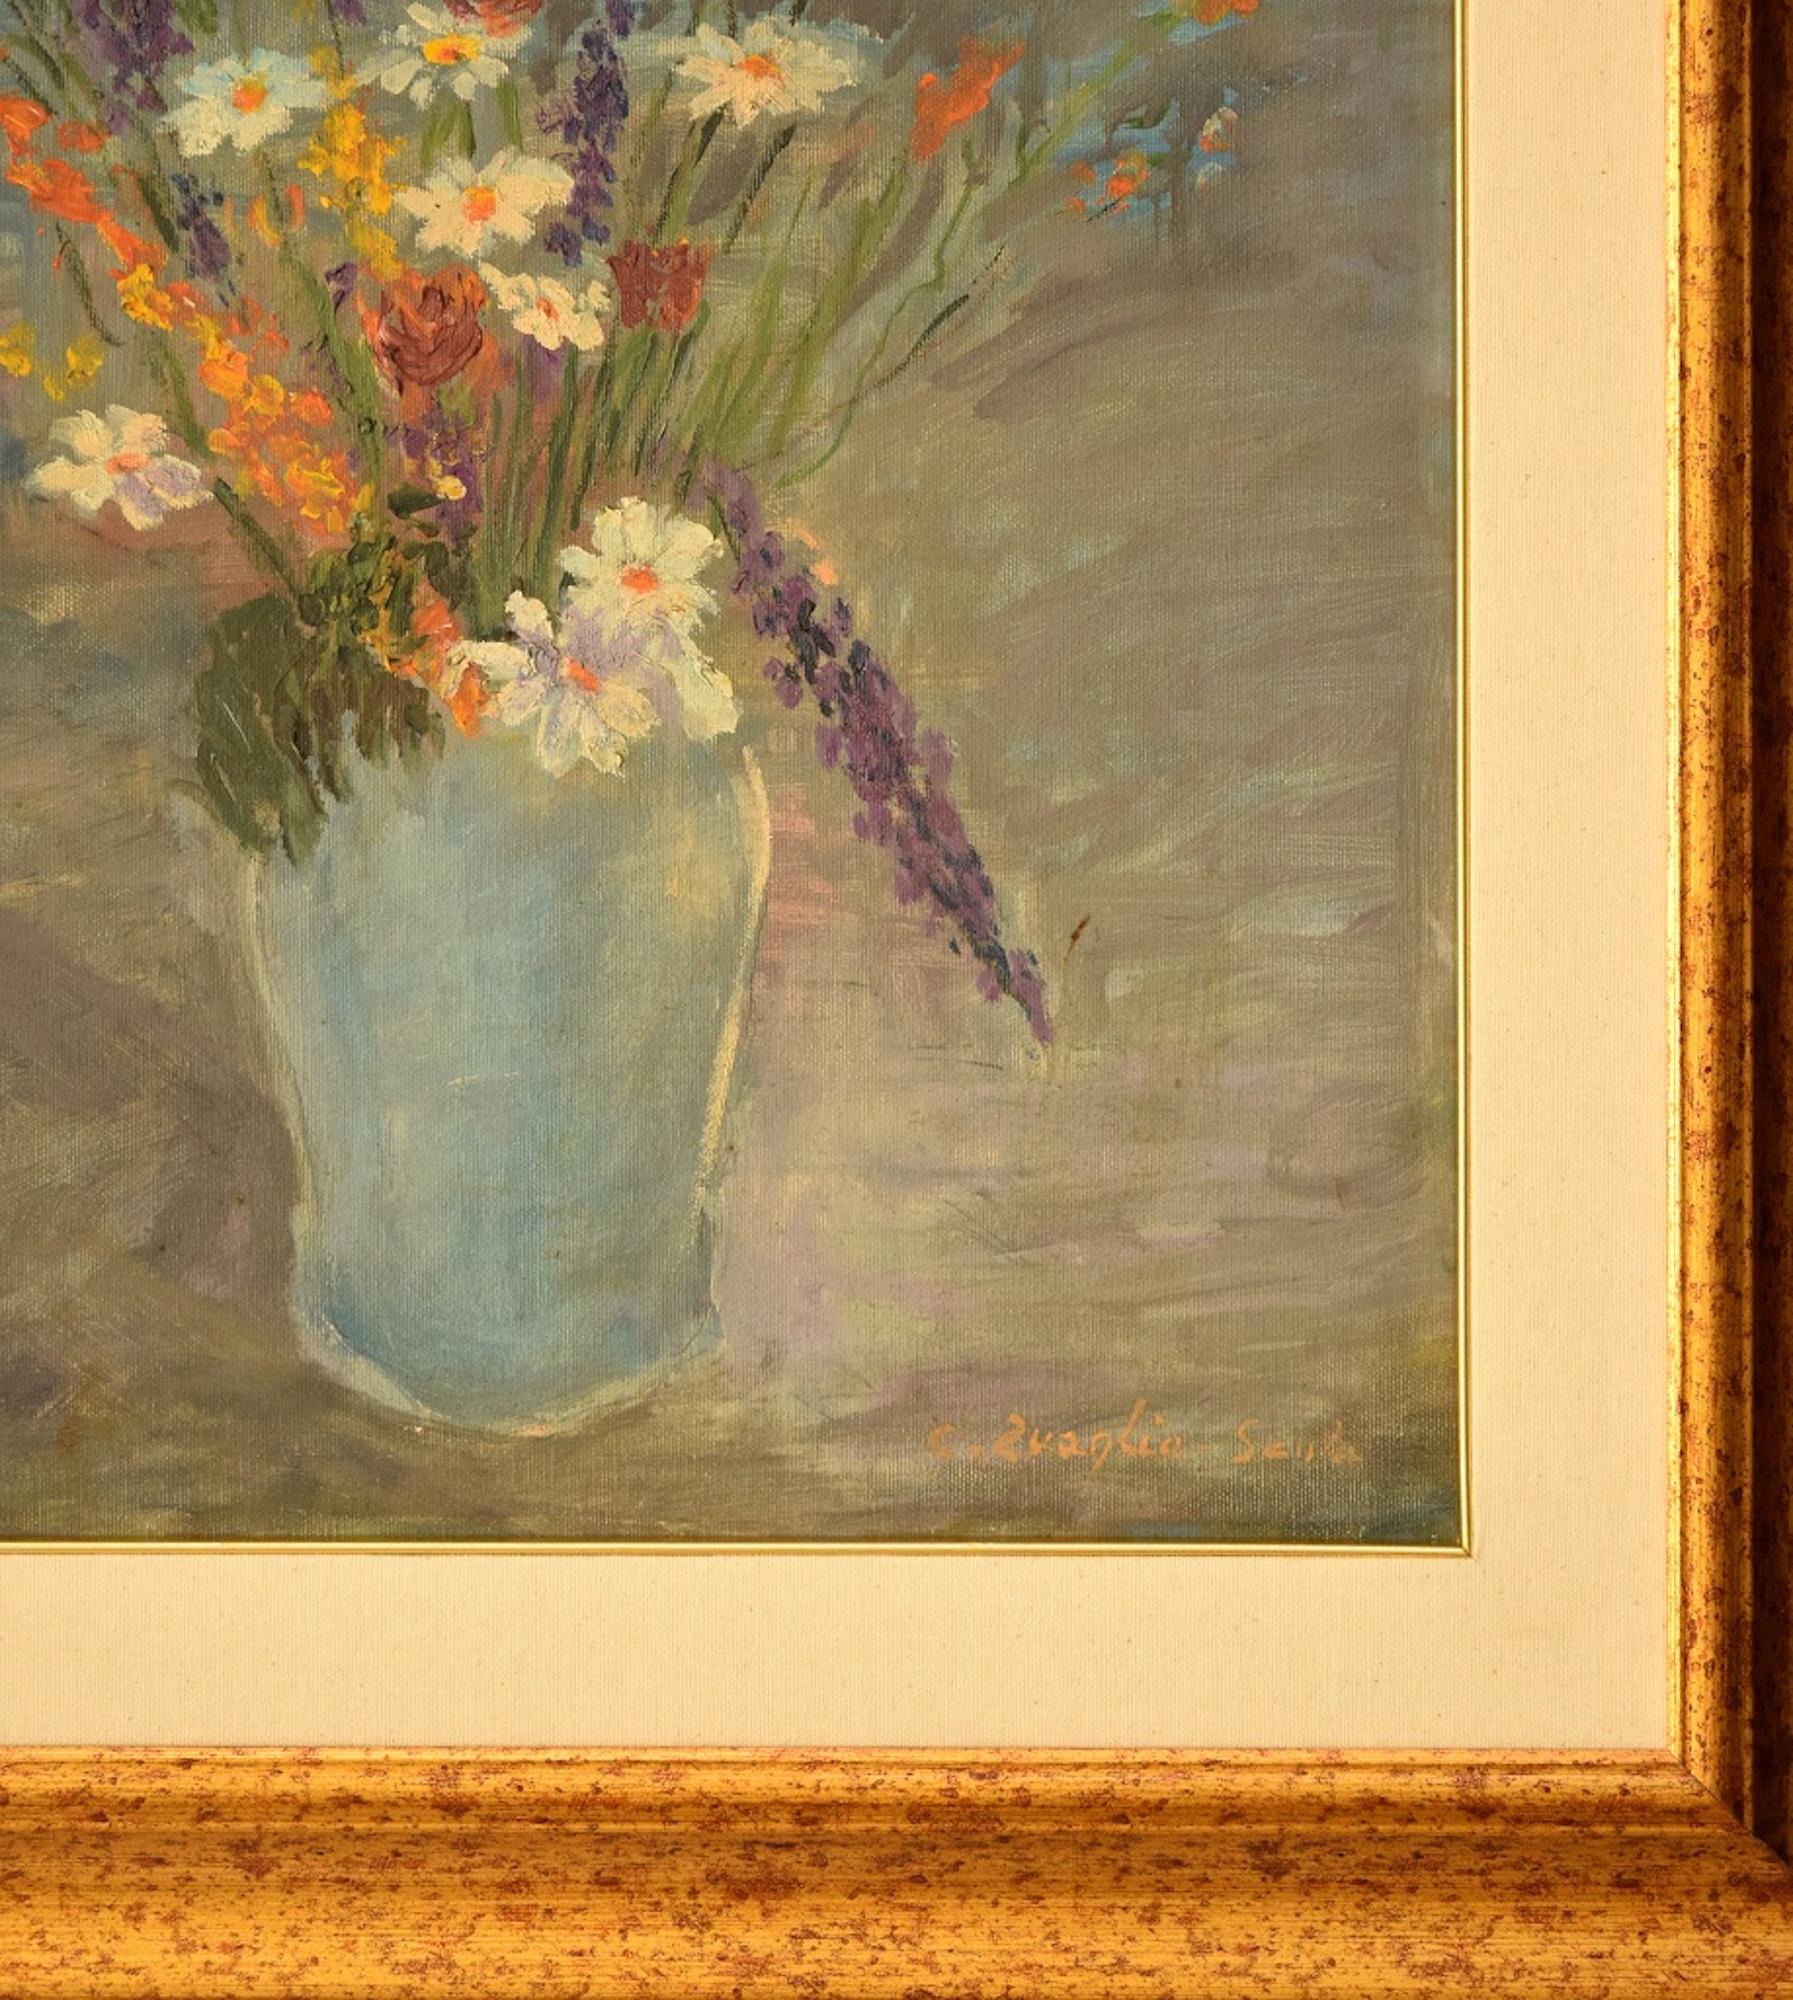 Still life with Flowers - Oil on Canvas by C. Quaglia -Mid 20th Century - Painting by Carlo Quaglia